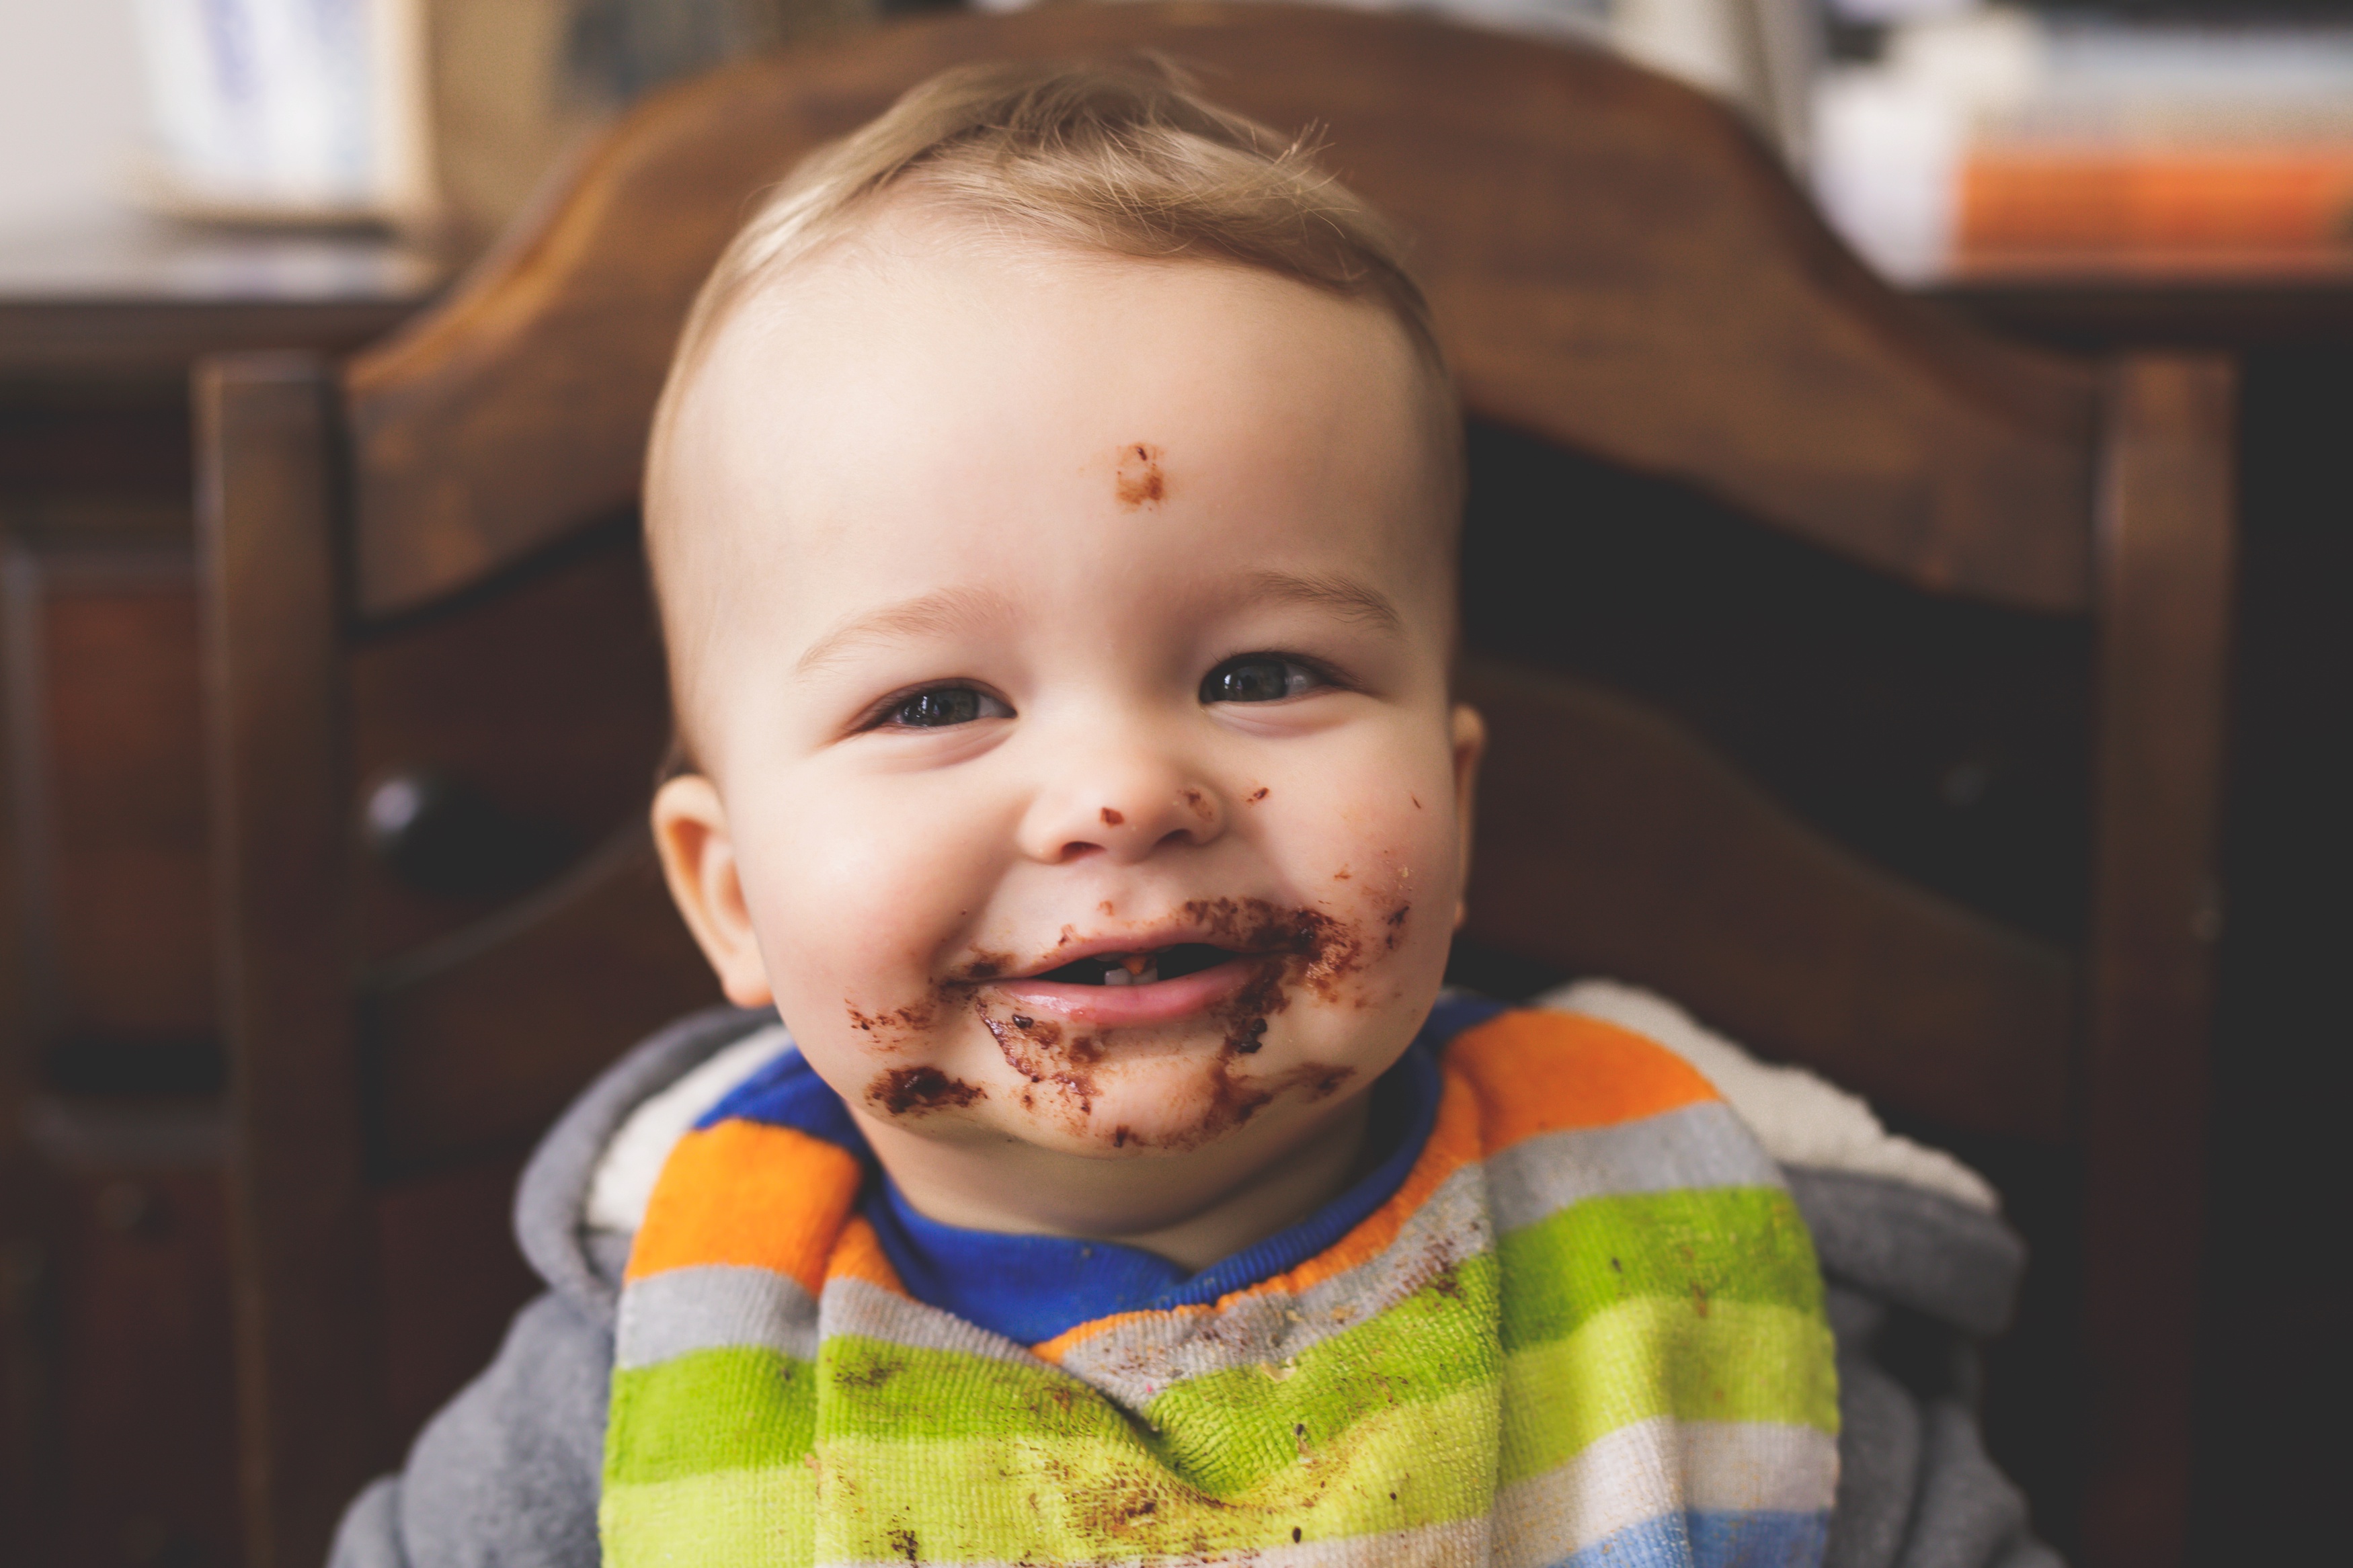 Chocolate messy face